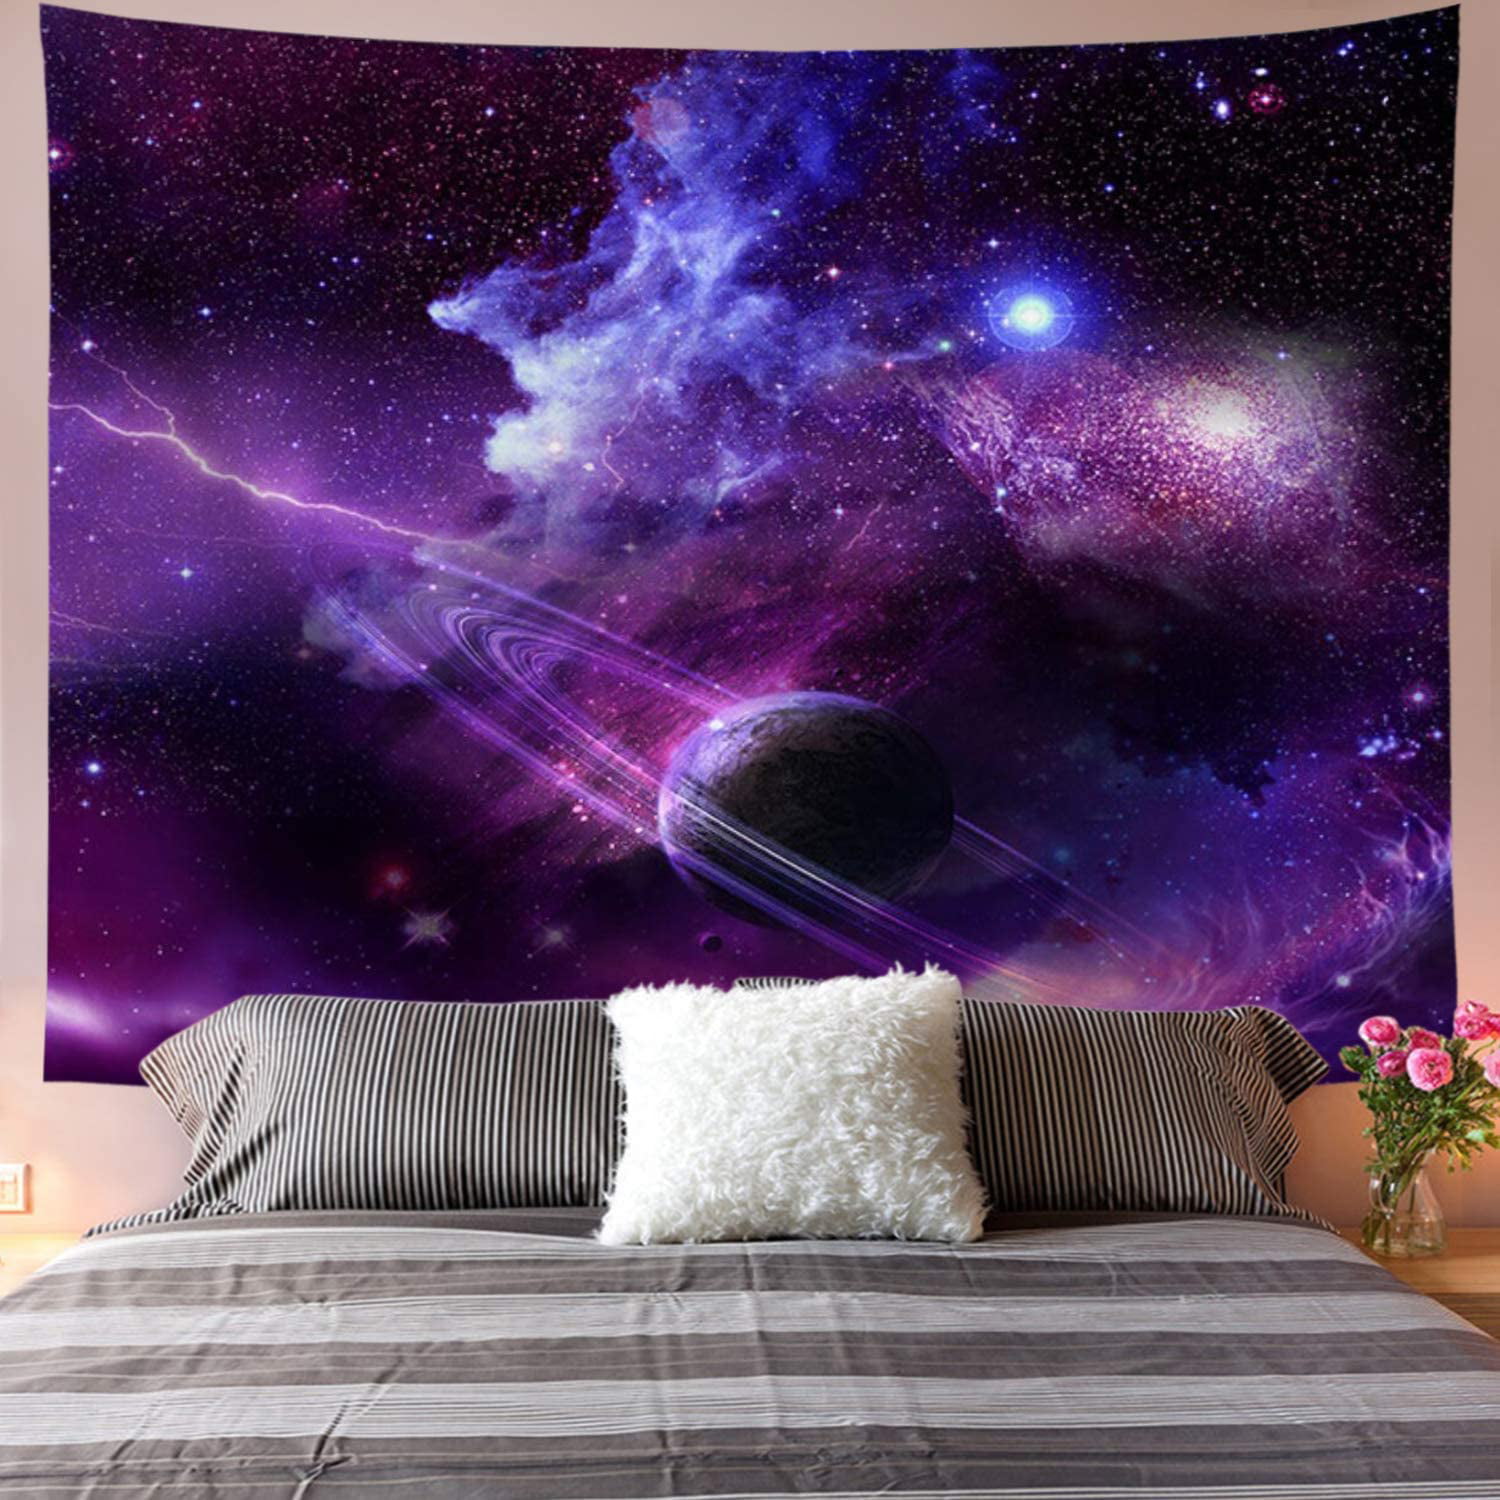 Psychedelic Retro Tapestry Room Wall Hanging Planet Landscape Bedroom Home Decor 